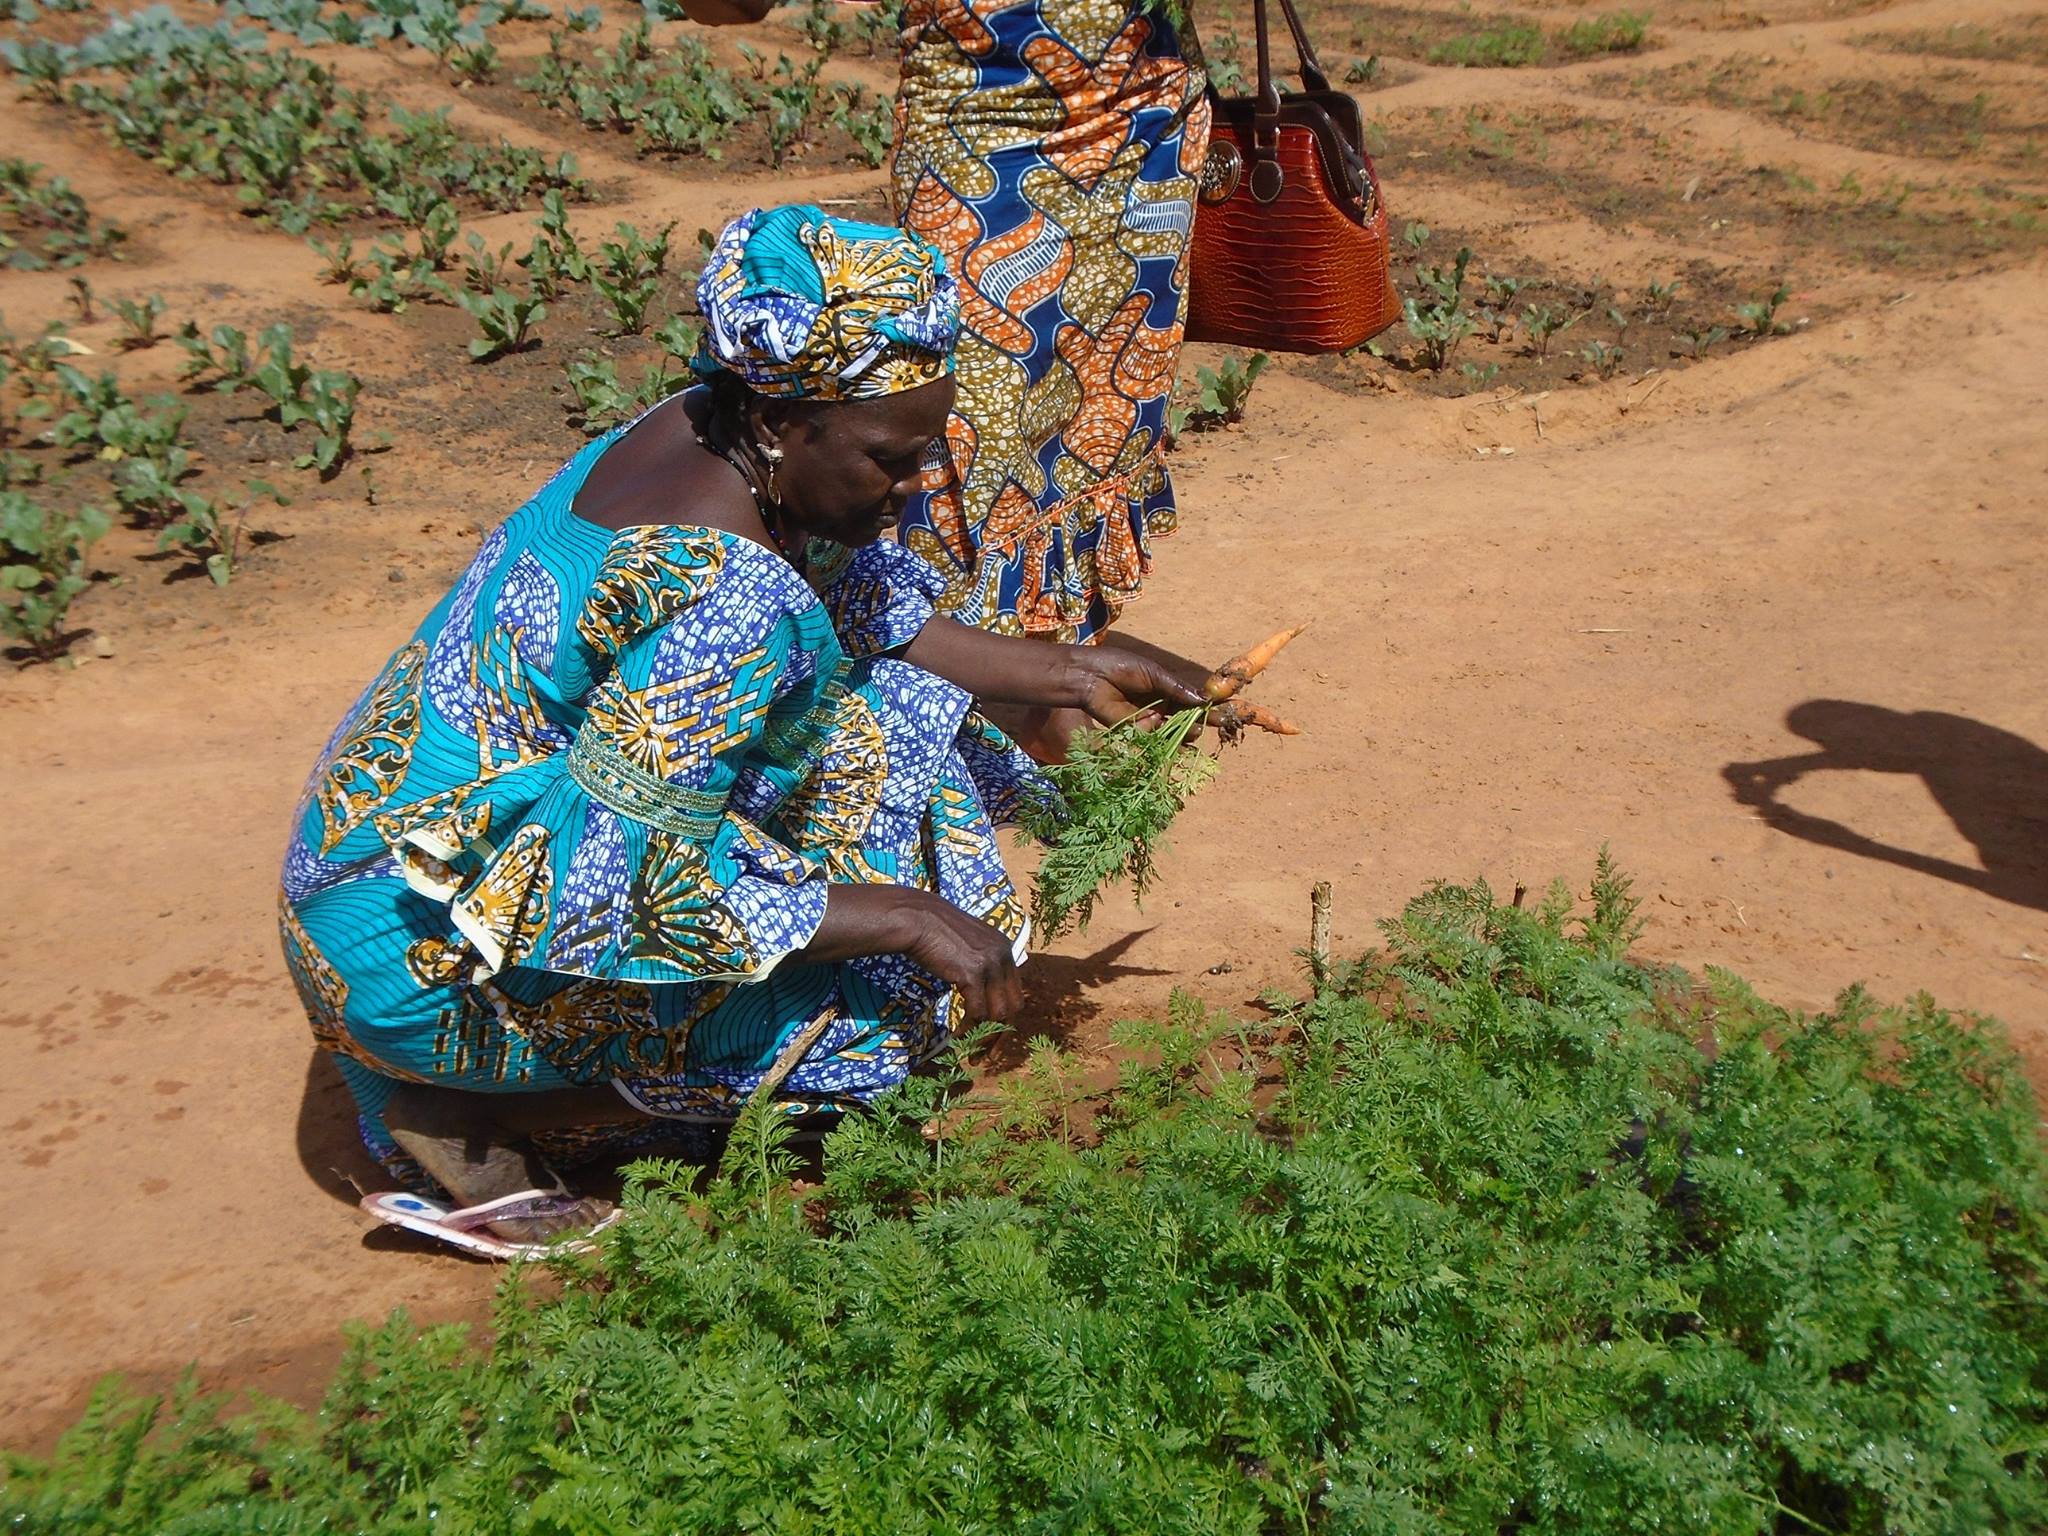 A New Look at Progress: Adapting to Climate Change in Mali